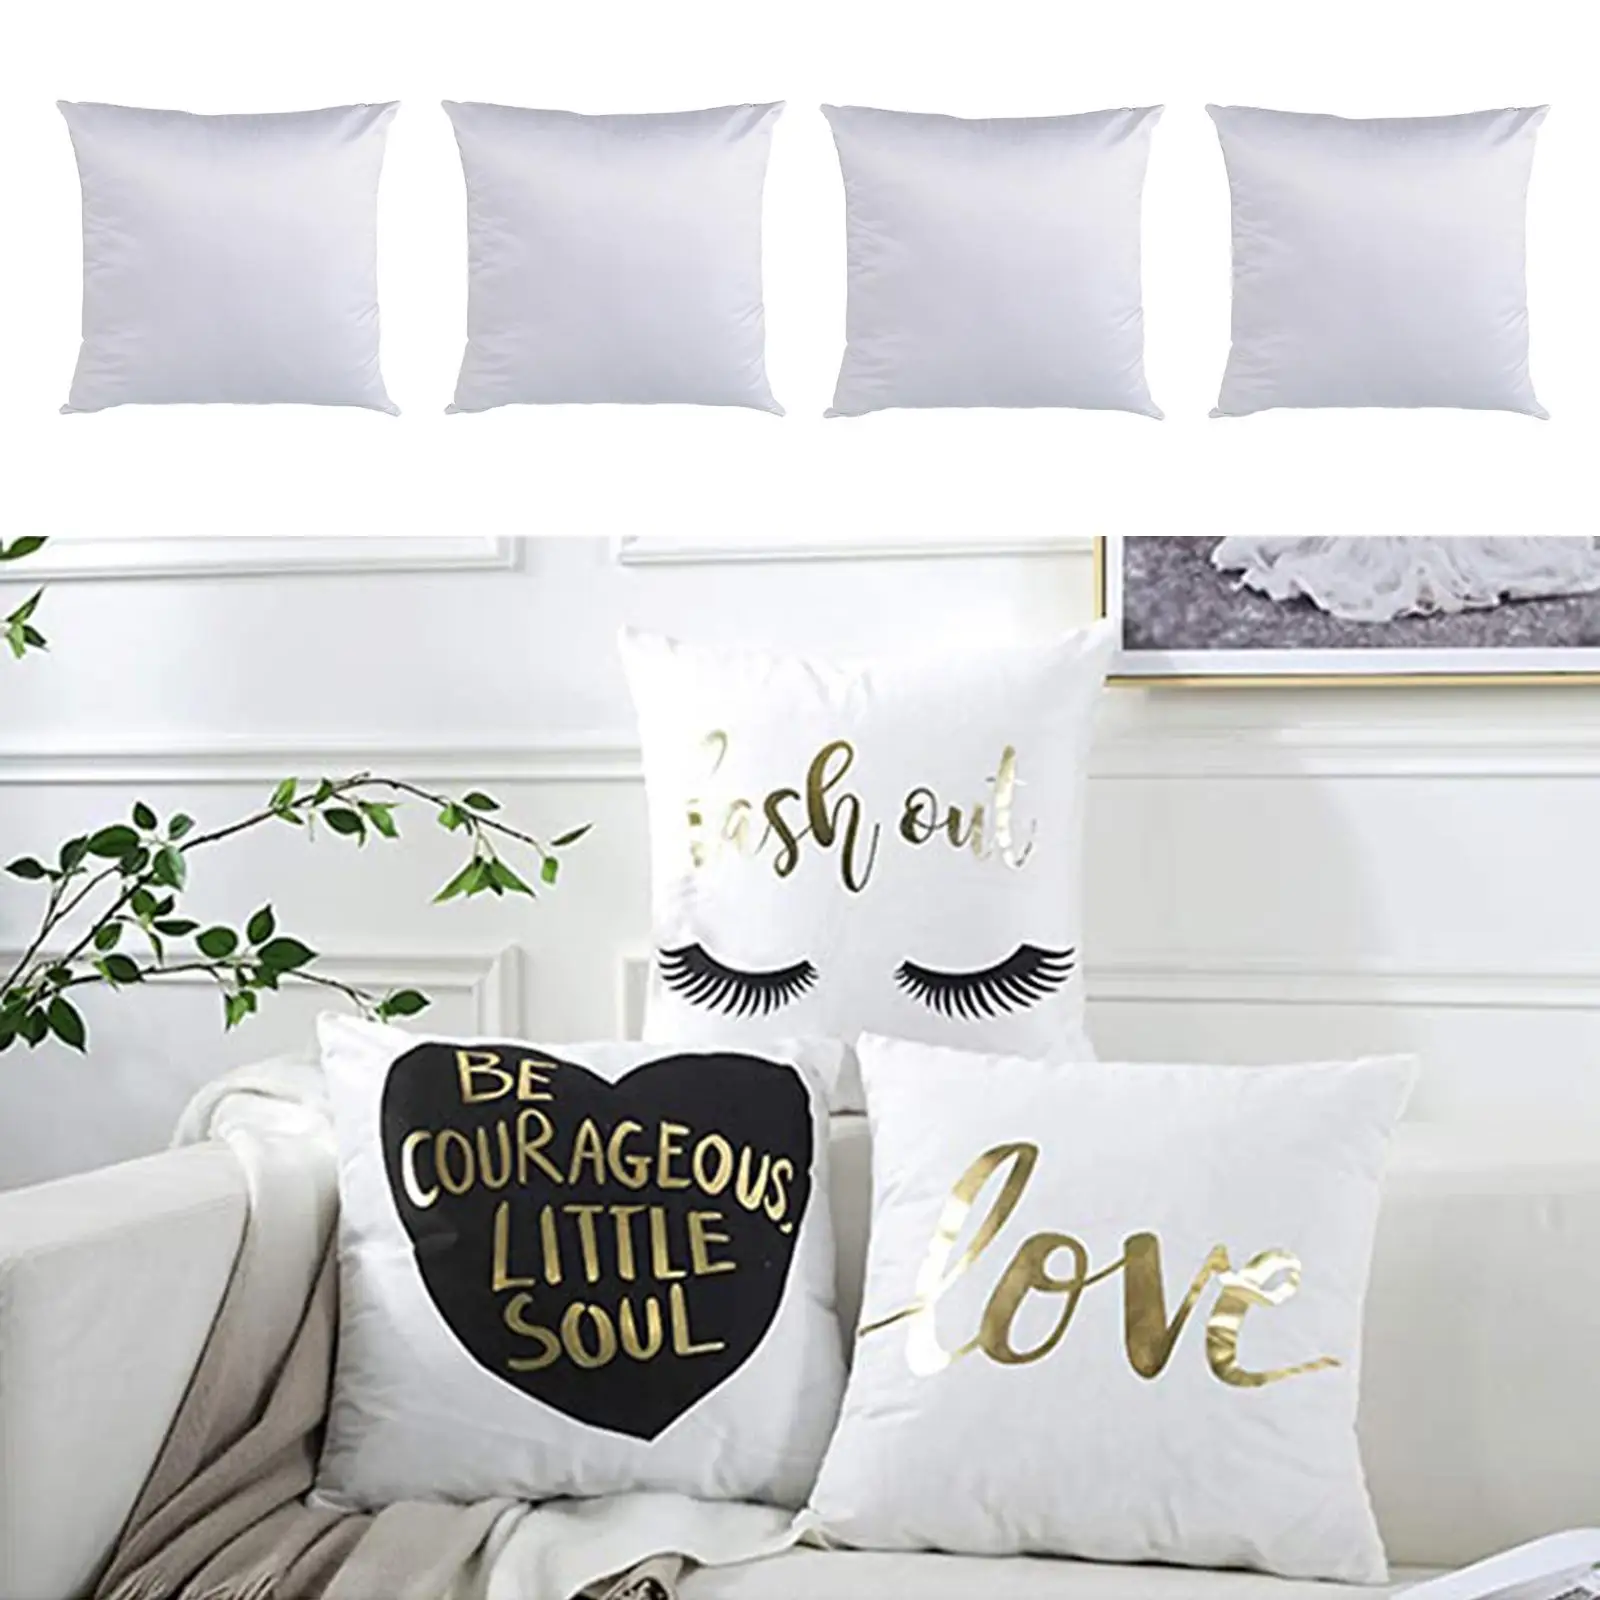 4 Packung Sublimation Pillow Case  Pillow Cover Pillowcases 